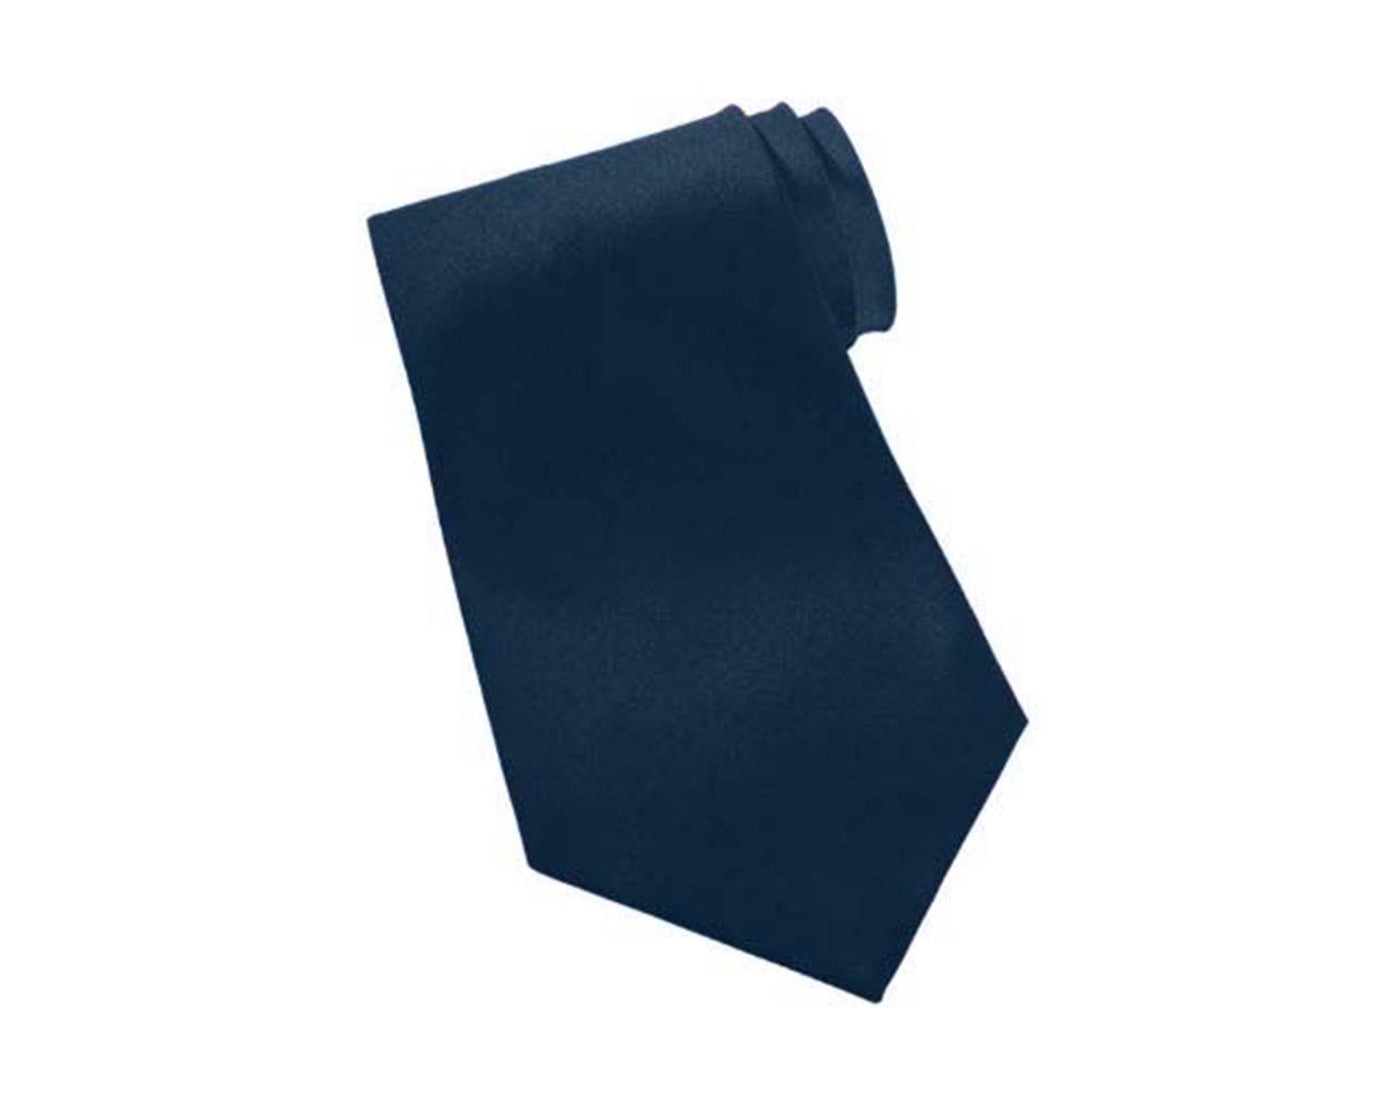 navy blue solid tie on white background